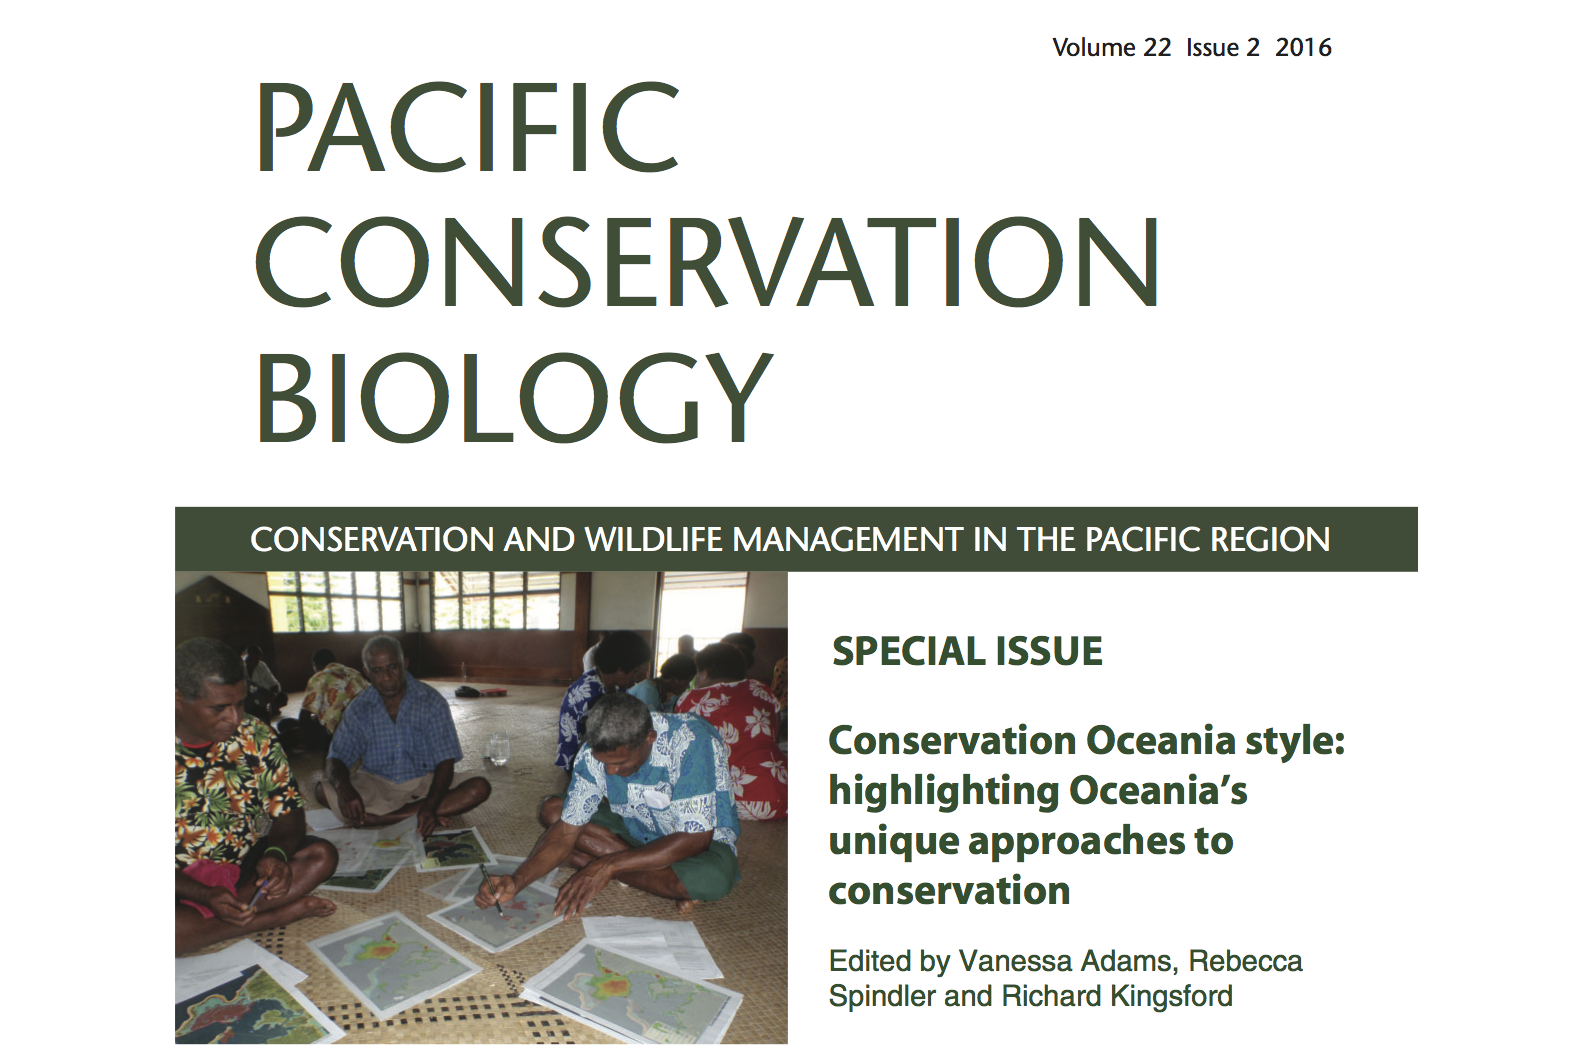 Special Issue in Pacific Conservation Biology Highlighting Oceania’s Unique Approaches to Conservation